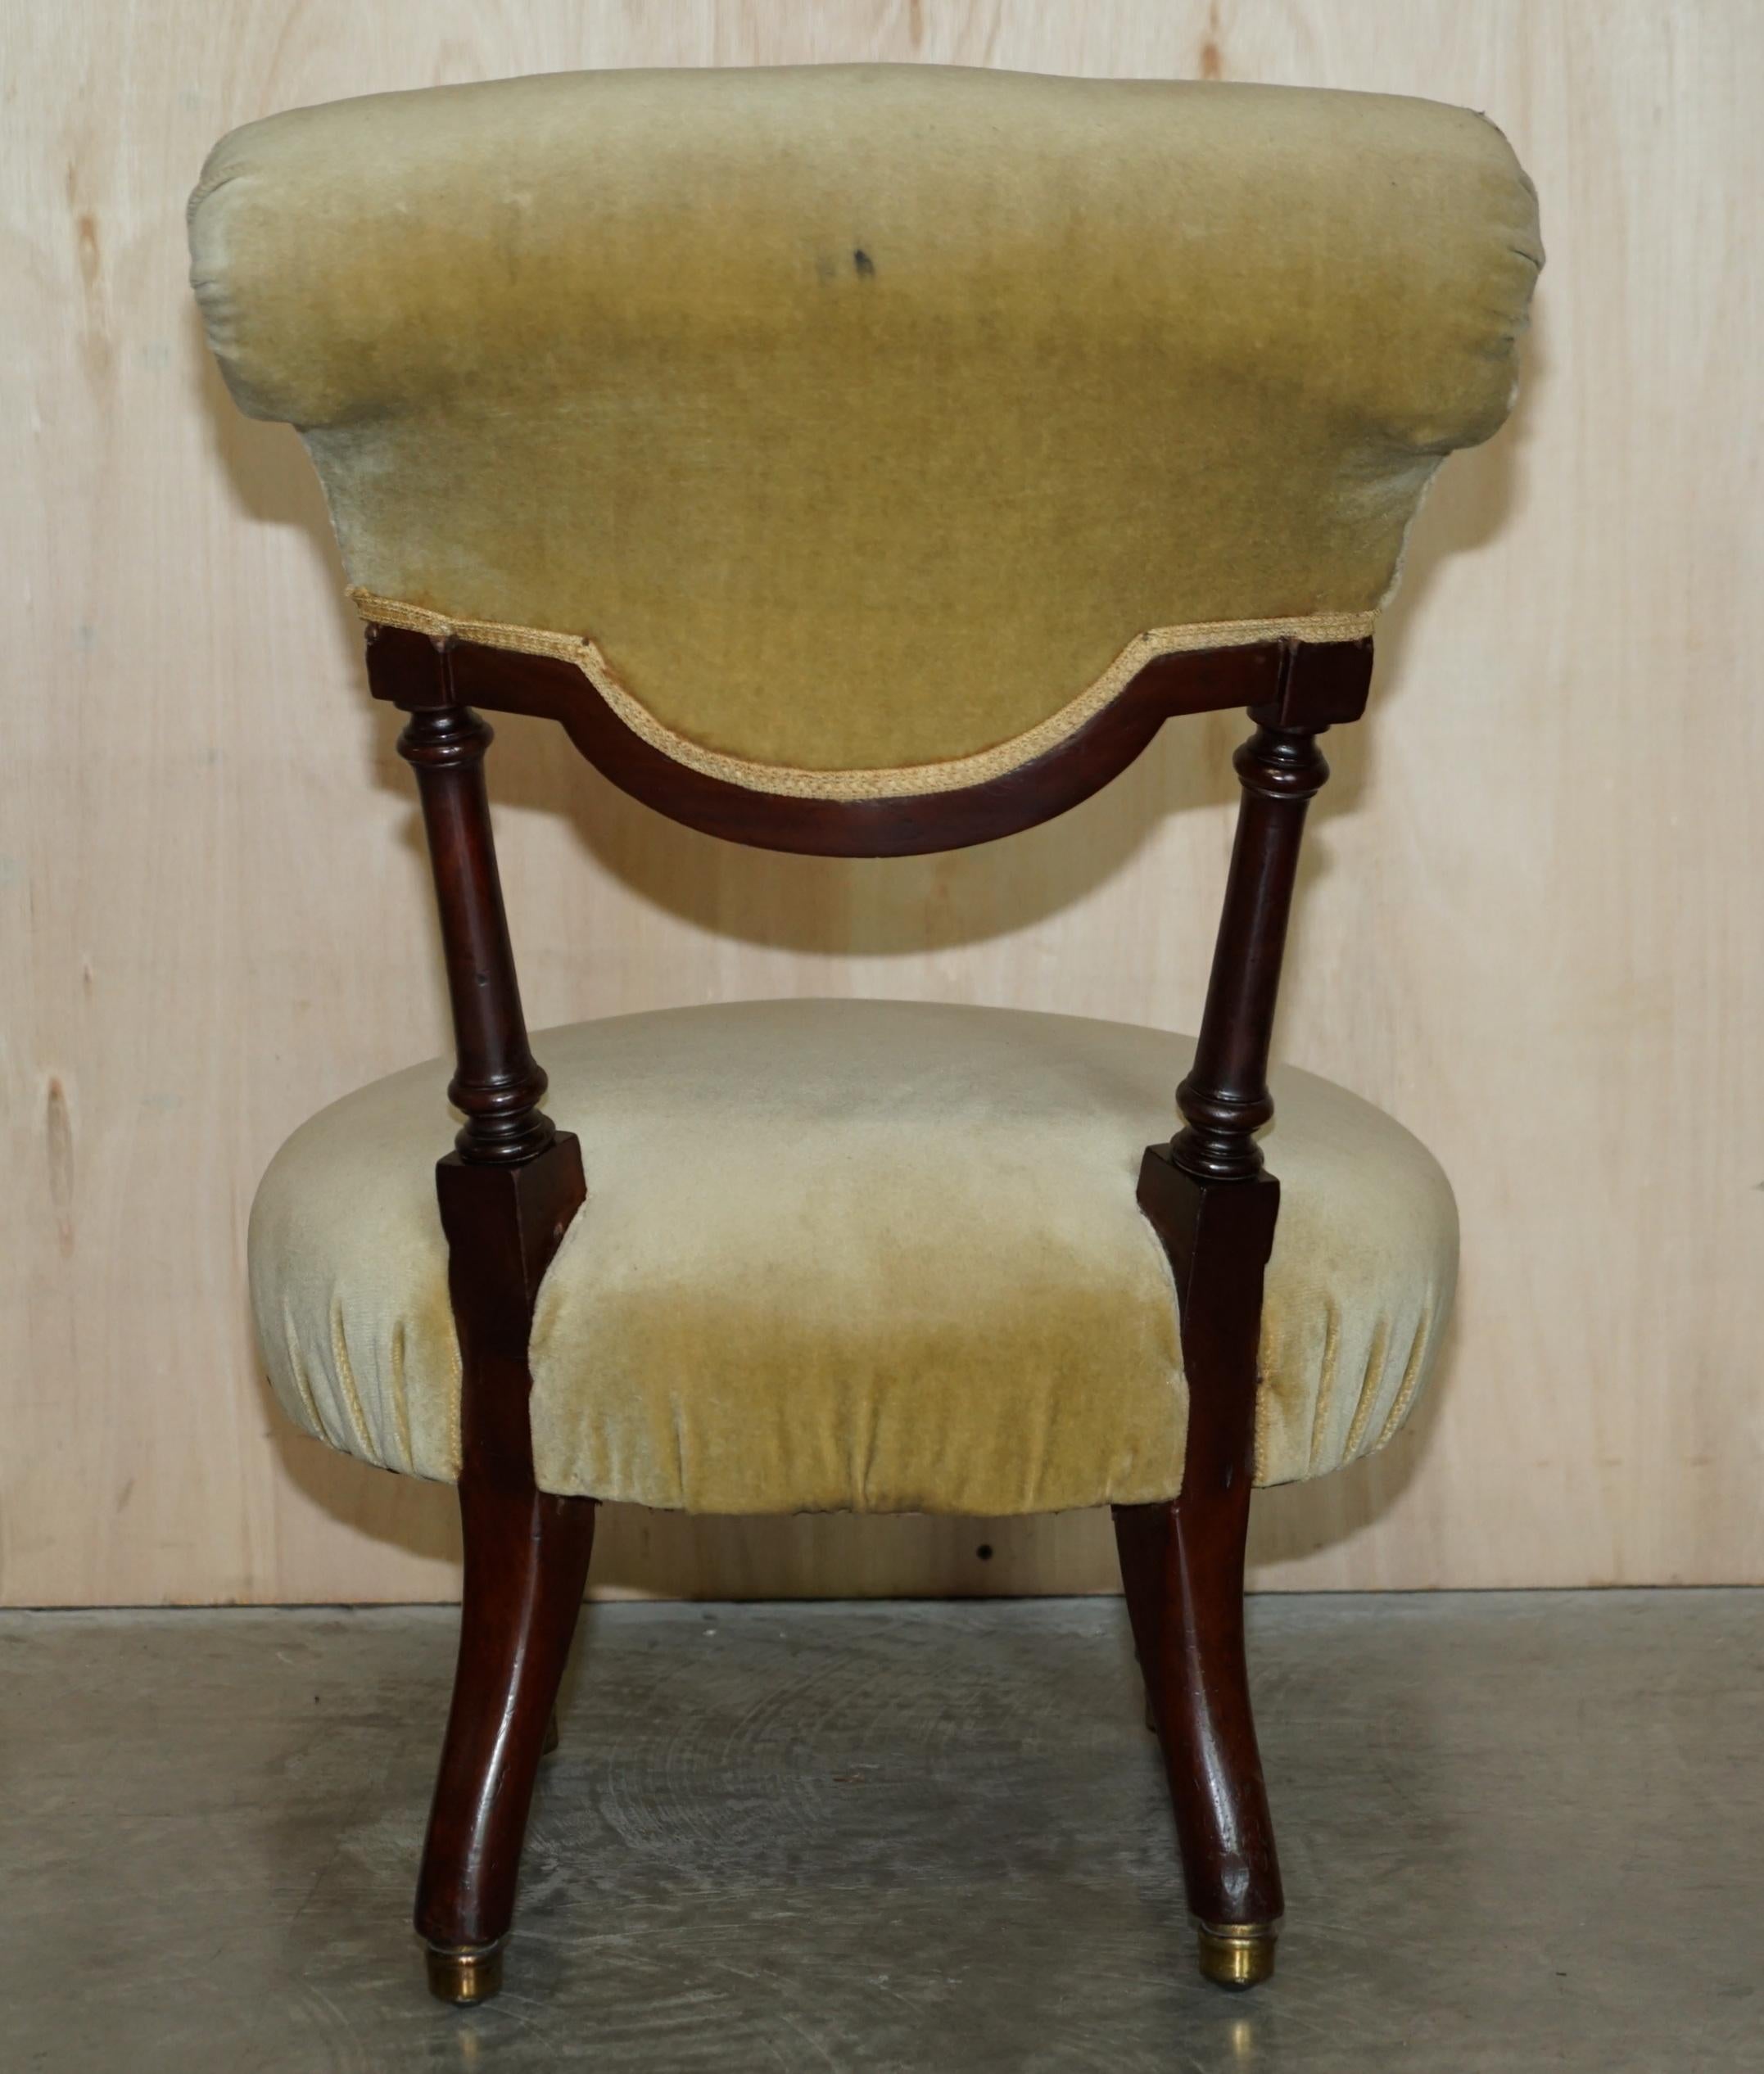 Hand-Crafted Small Antique Victorian Nursing Chair circa 1860 Carved Hardwood Frame For Sale